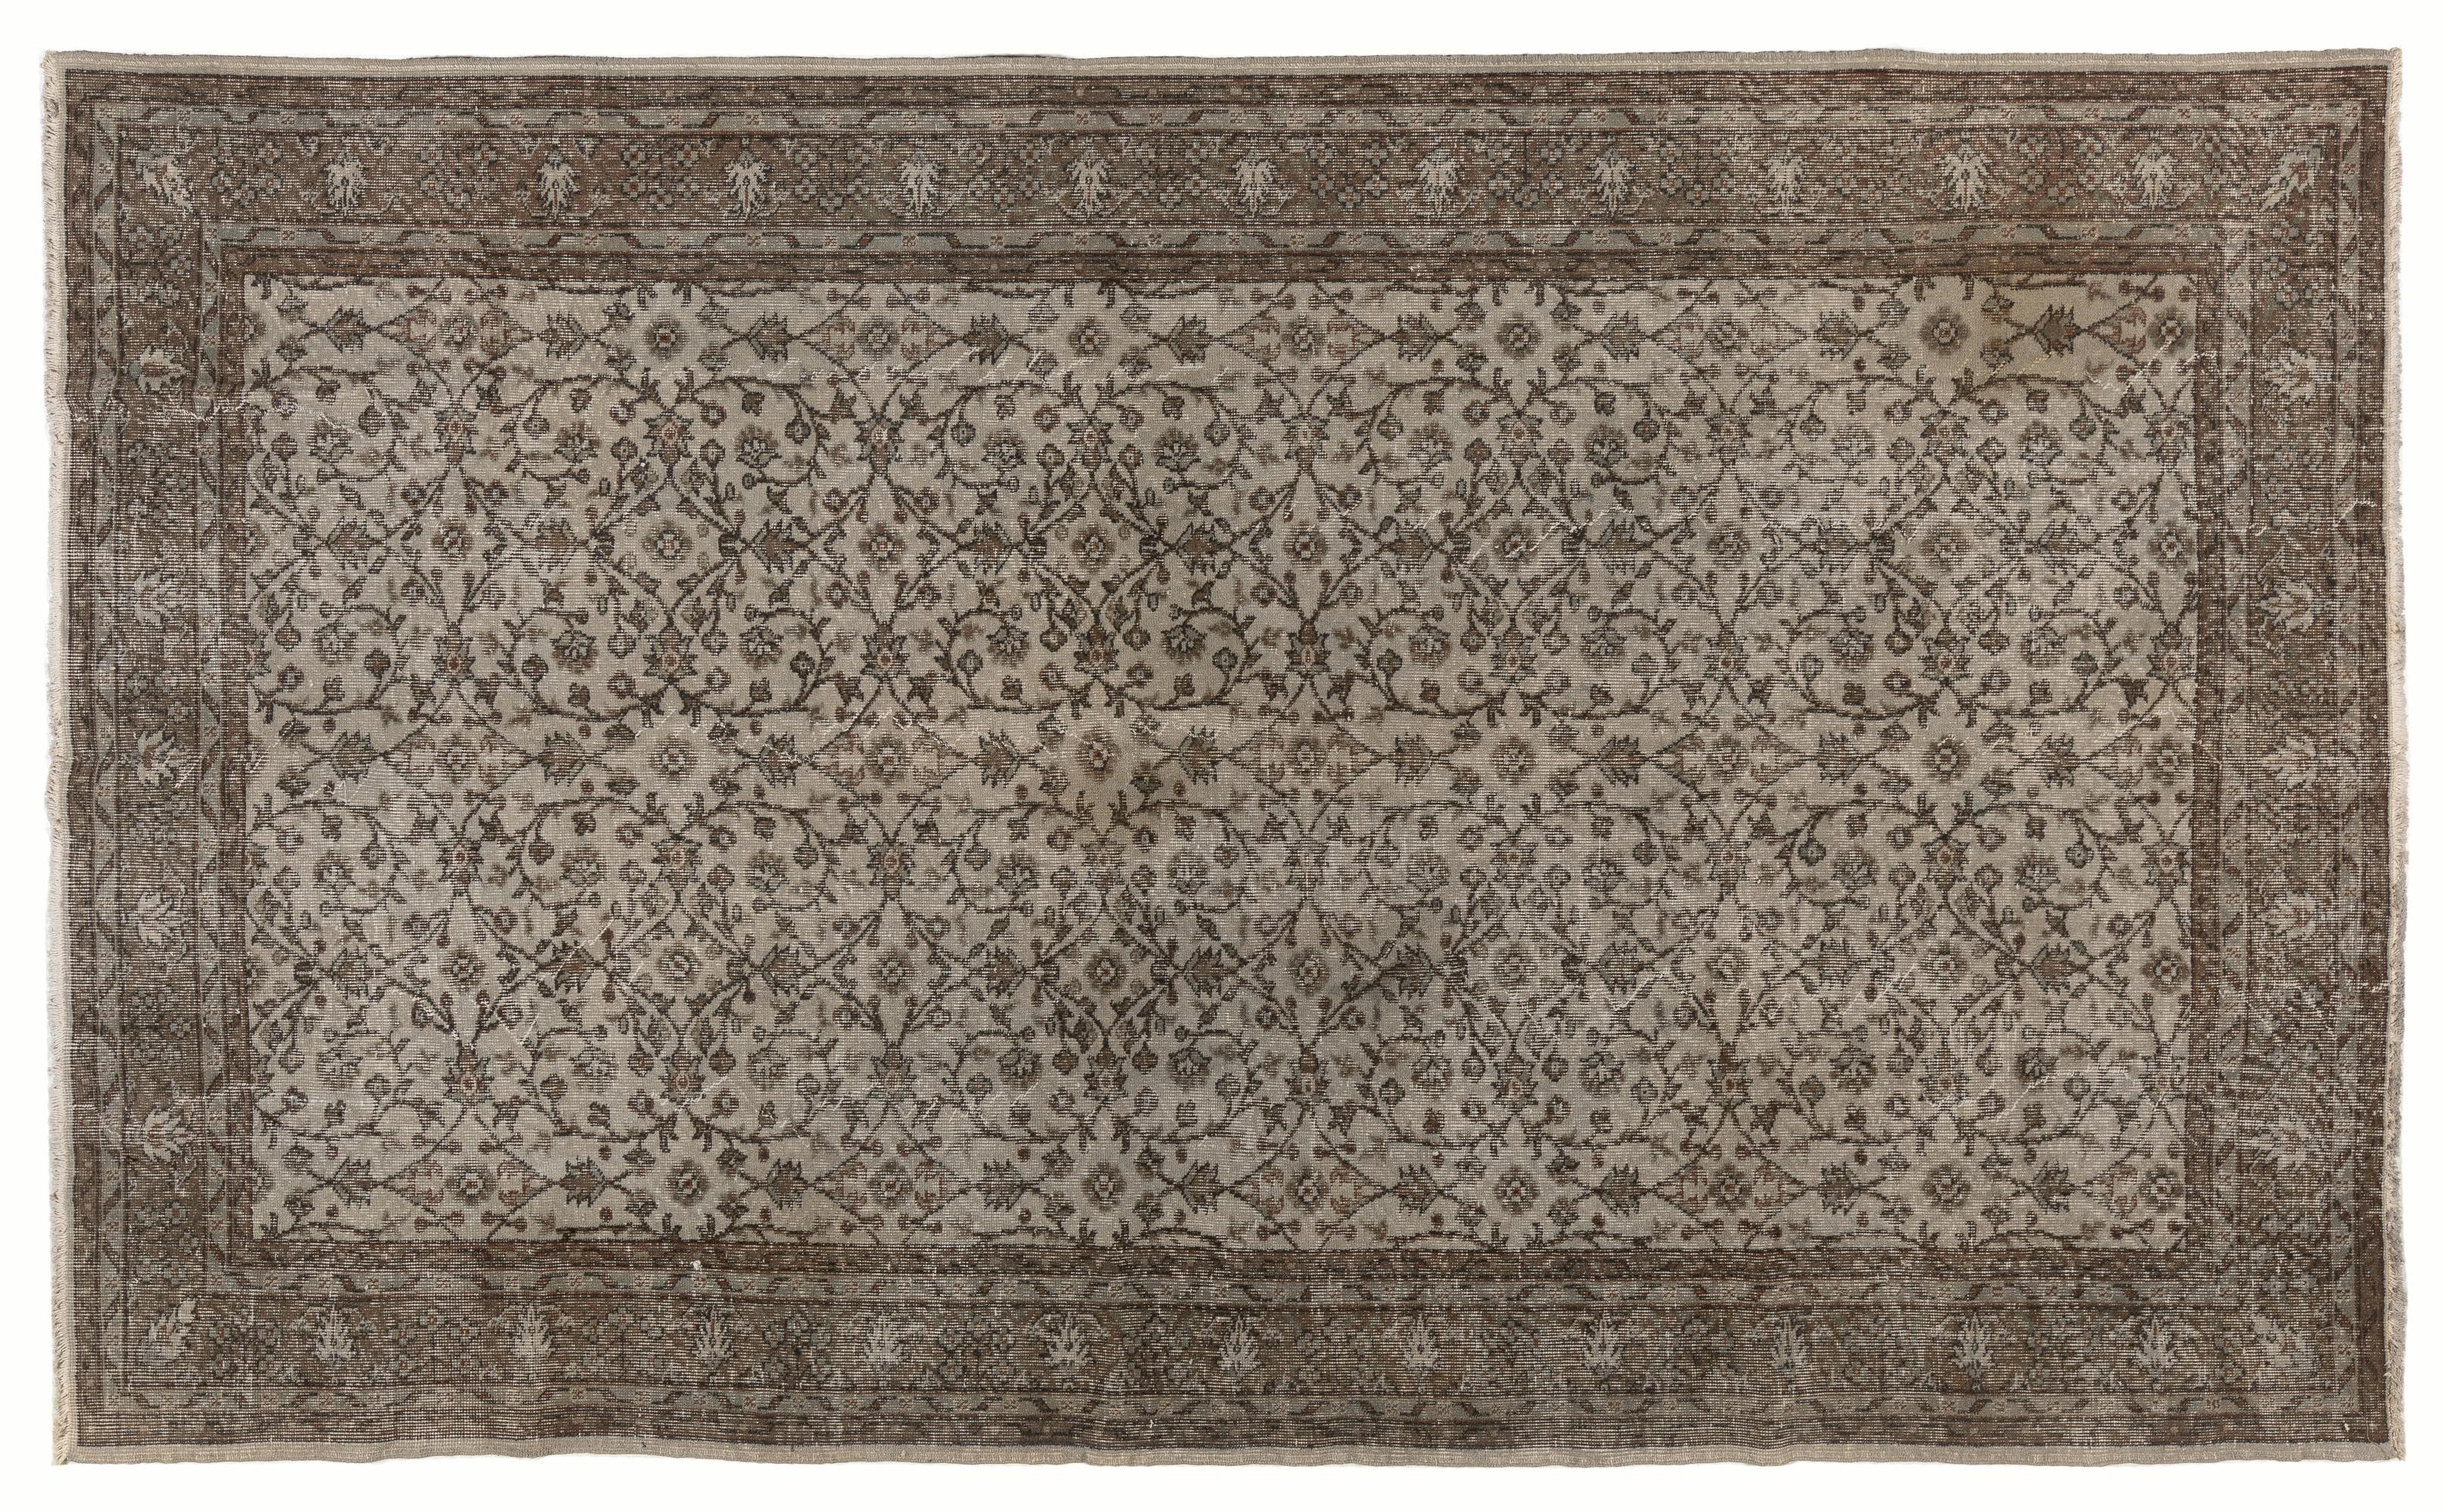 Cotton 7x11 Ft Handmade Vintage Anatolian Area Rug. Floral Modern Wool Carpet in Gray For Sale